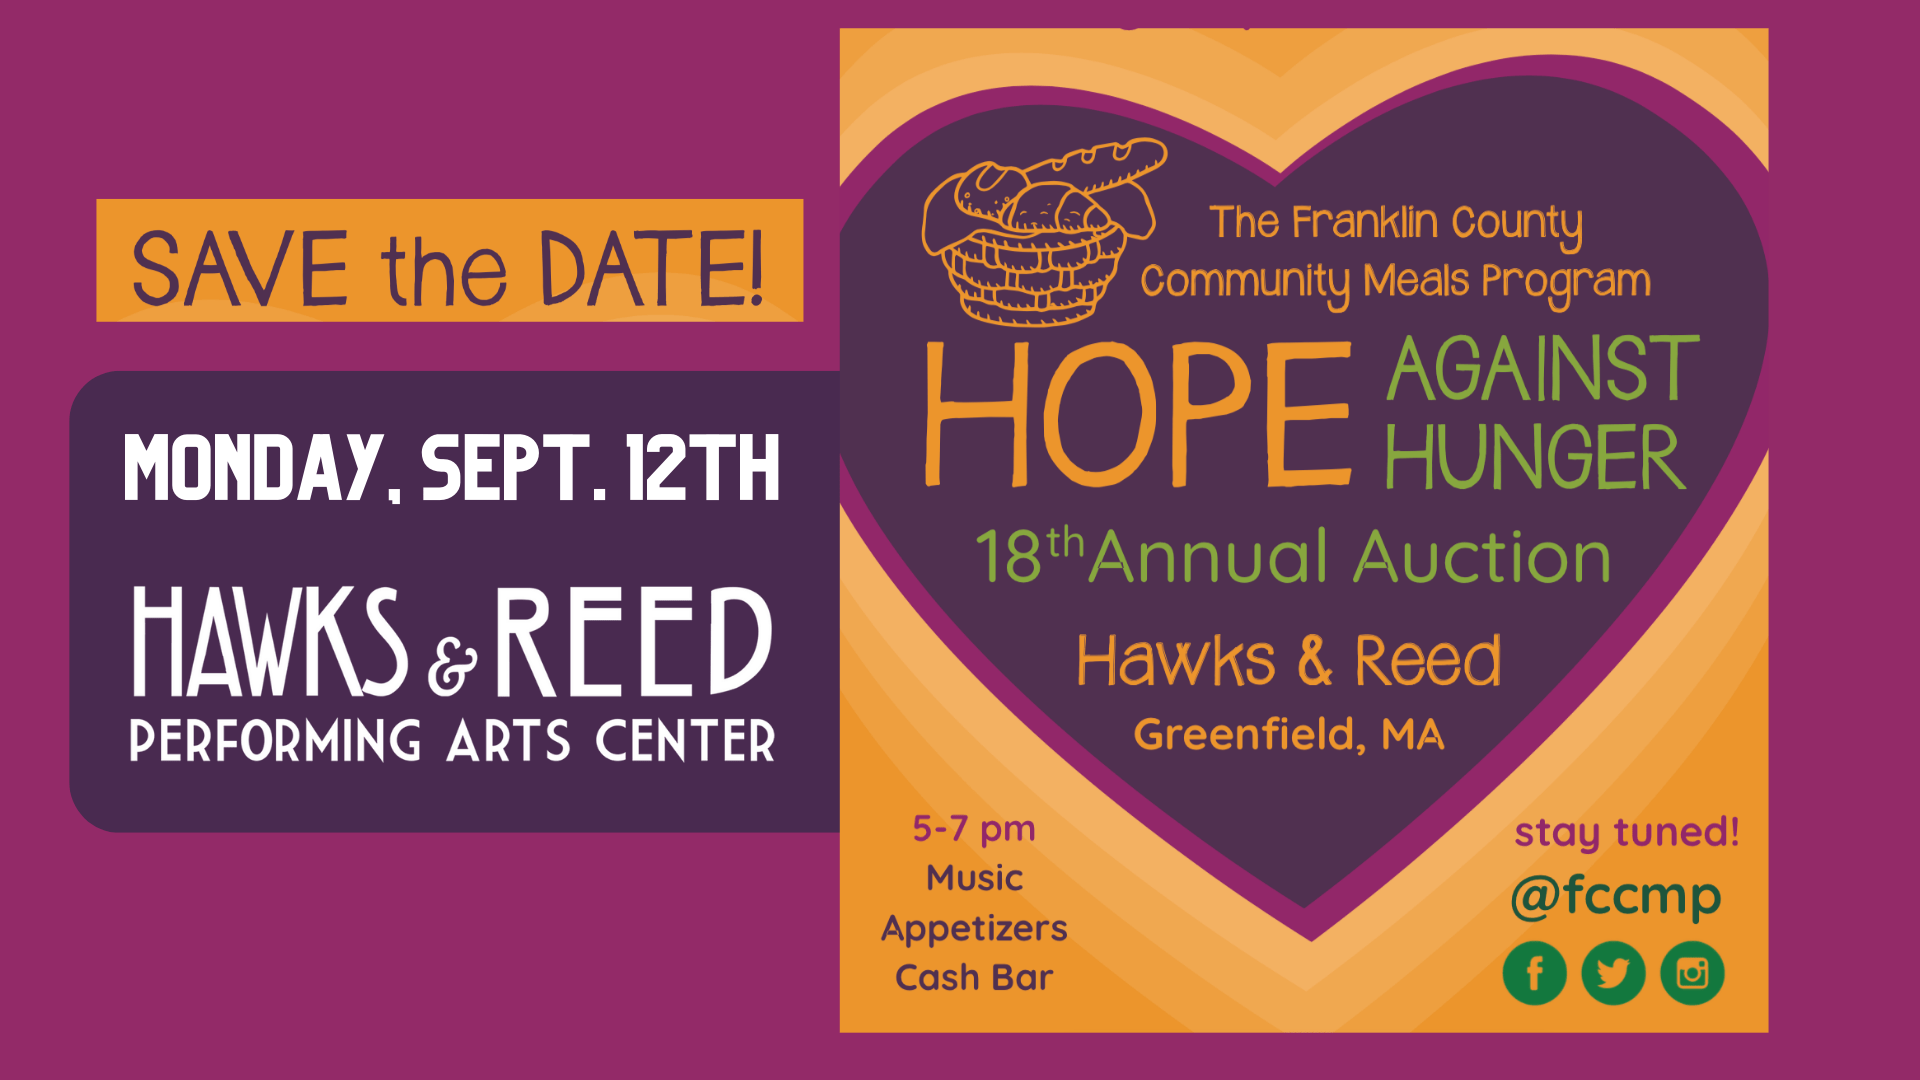 Hope Against Hunger – 18th Annual Auction